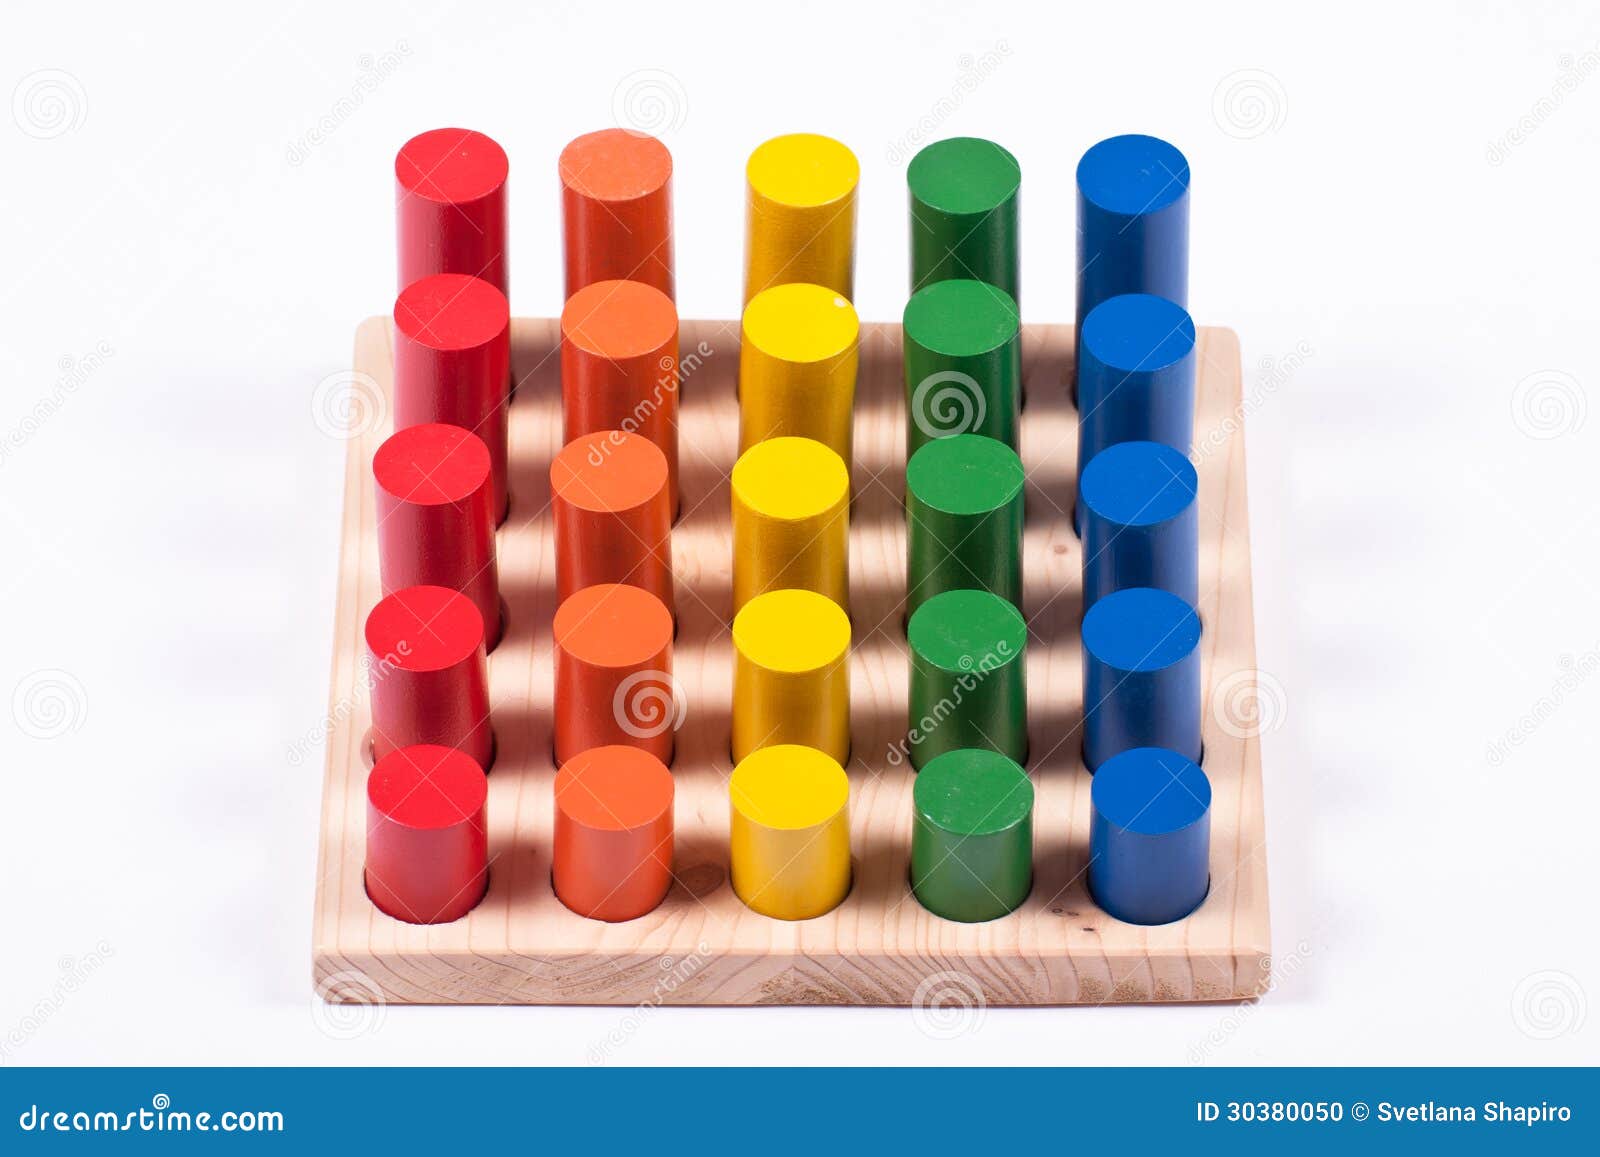 early learning toy: cylinders of different colors and height